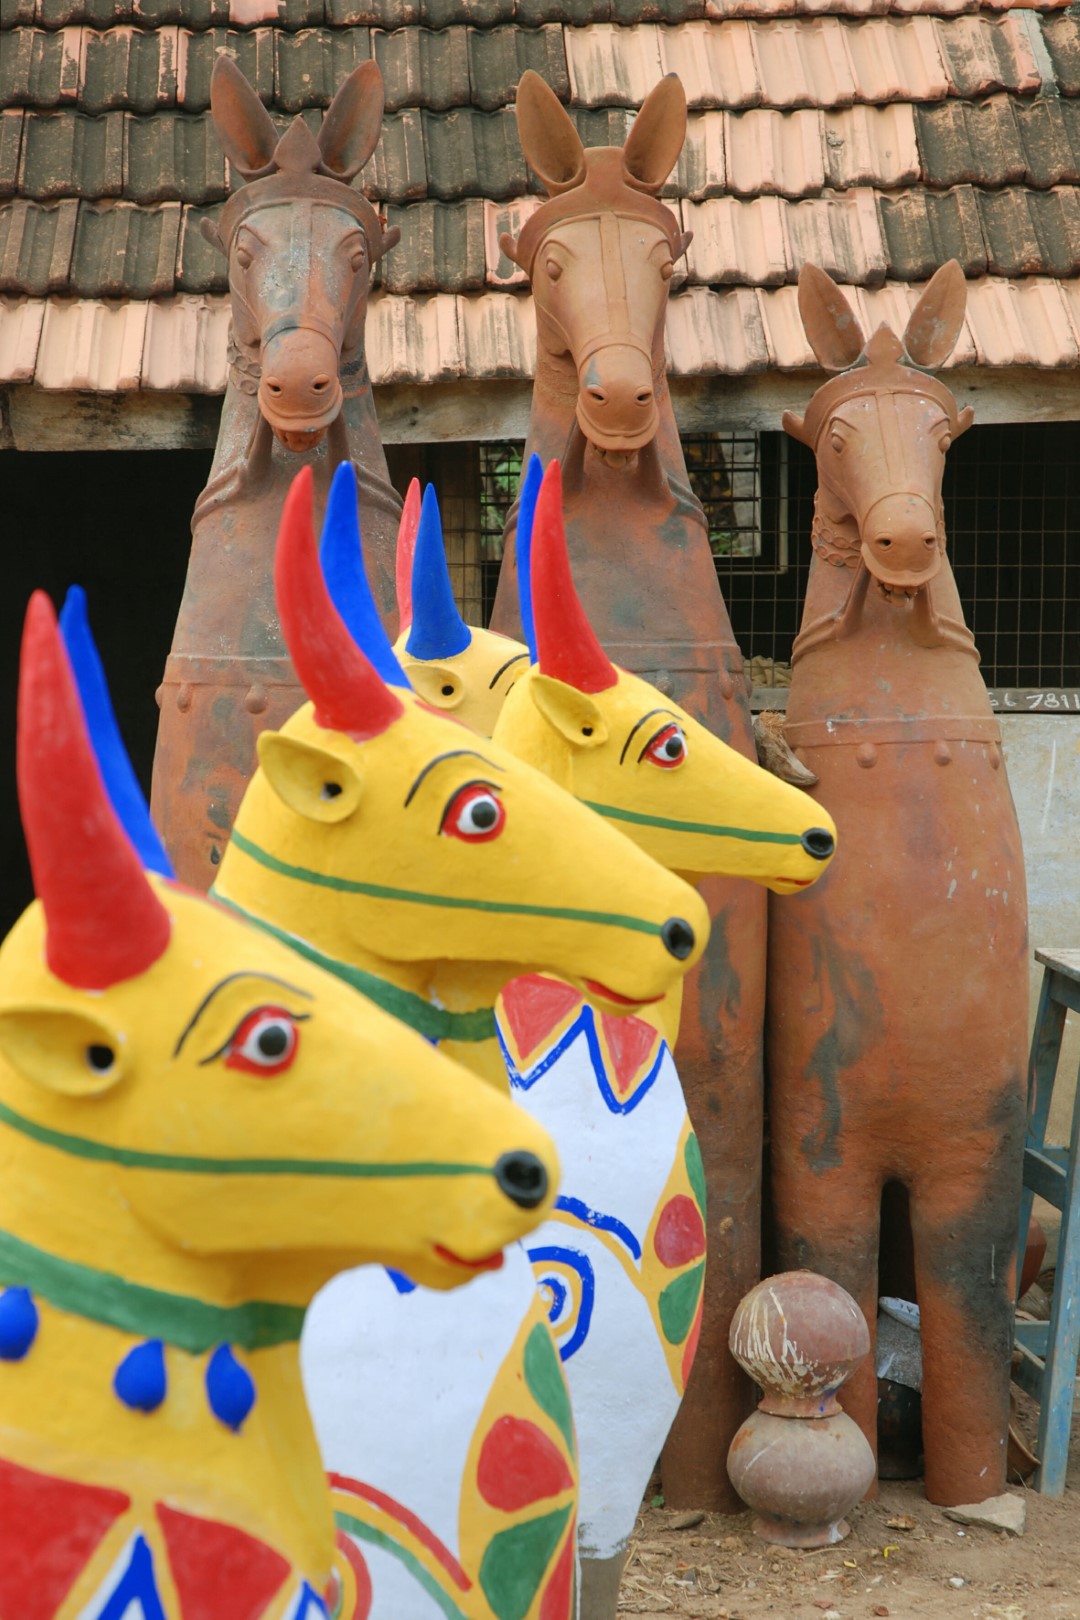 <span style="font-weight:normal;">Morning of the Panjati festival in Aranthangi. The unpainted horses must wait their turn; in ten days, they will be offered to the same god at the same shrine, but at a festival organised by a "rival" village.</span>